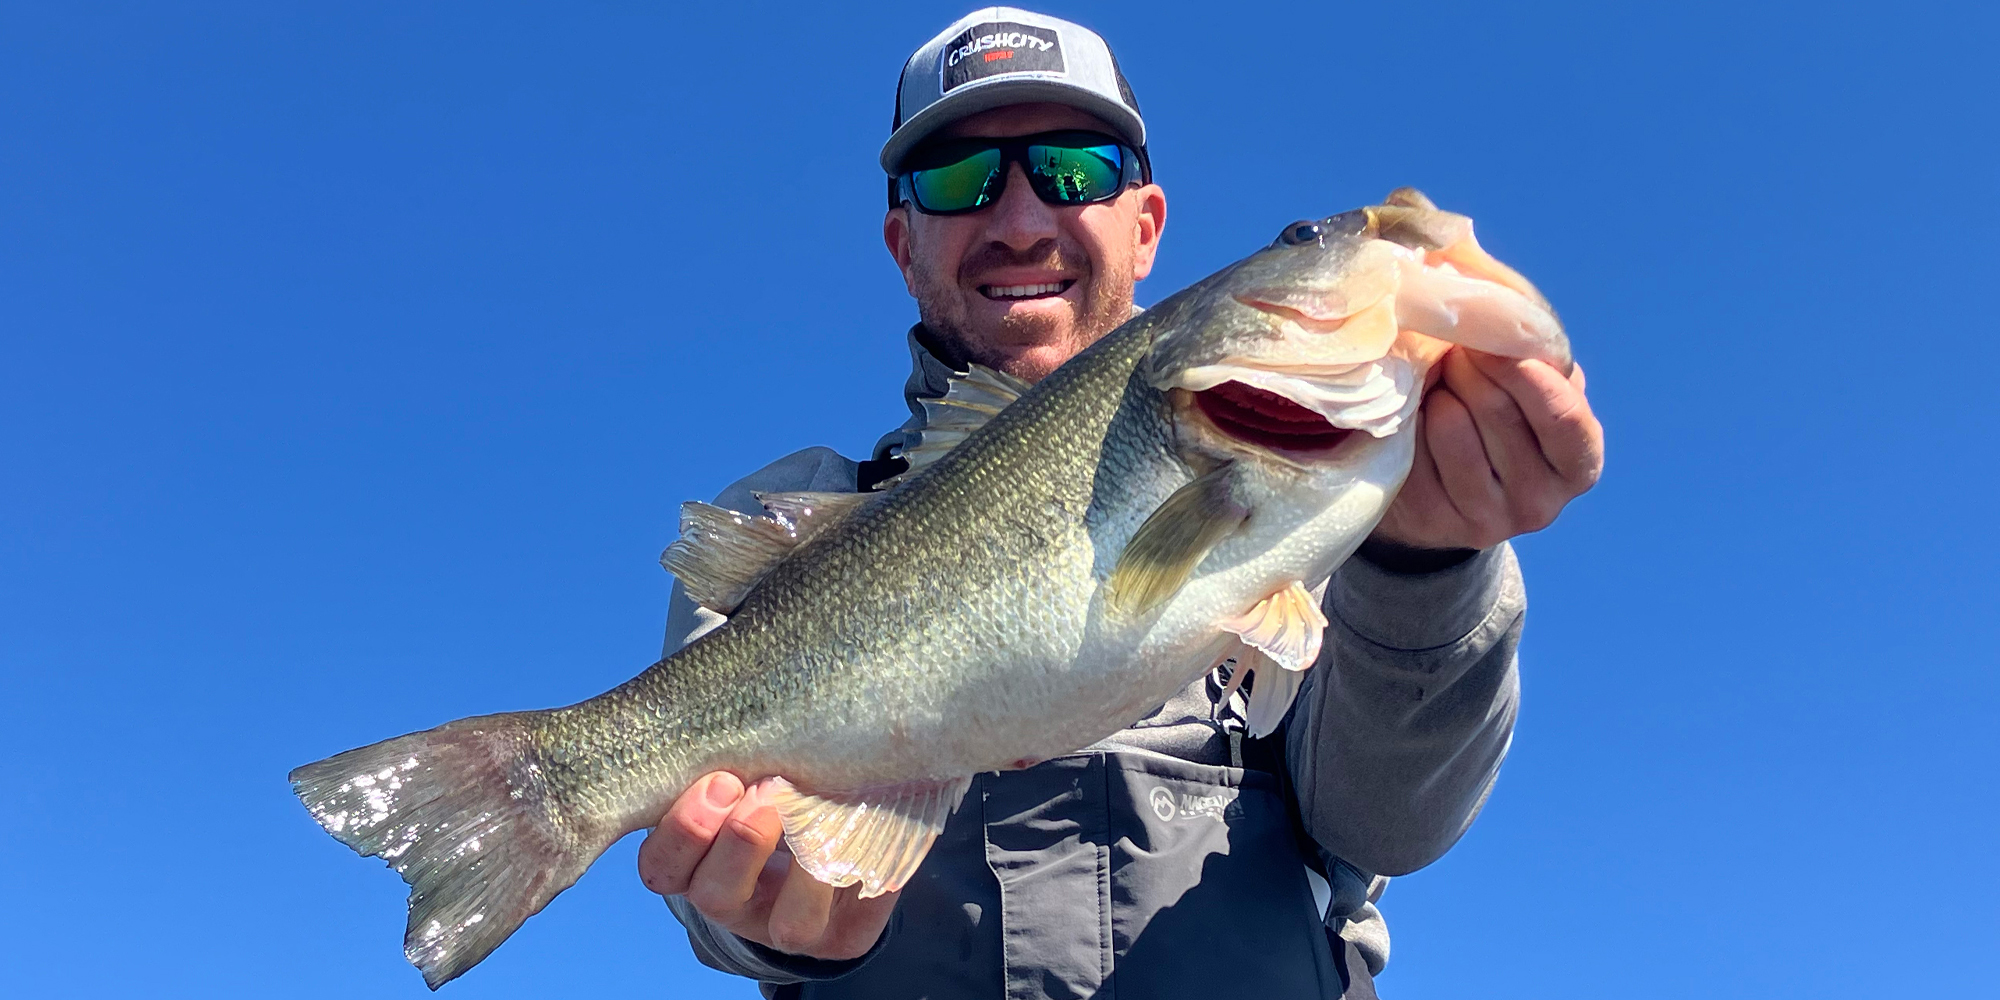 Wheeler back atop leaderboard after breaking 50 pounds on Santee Cooper -  Major League Fishing